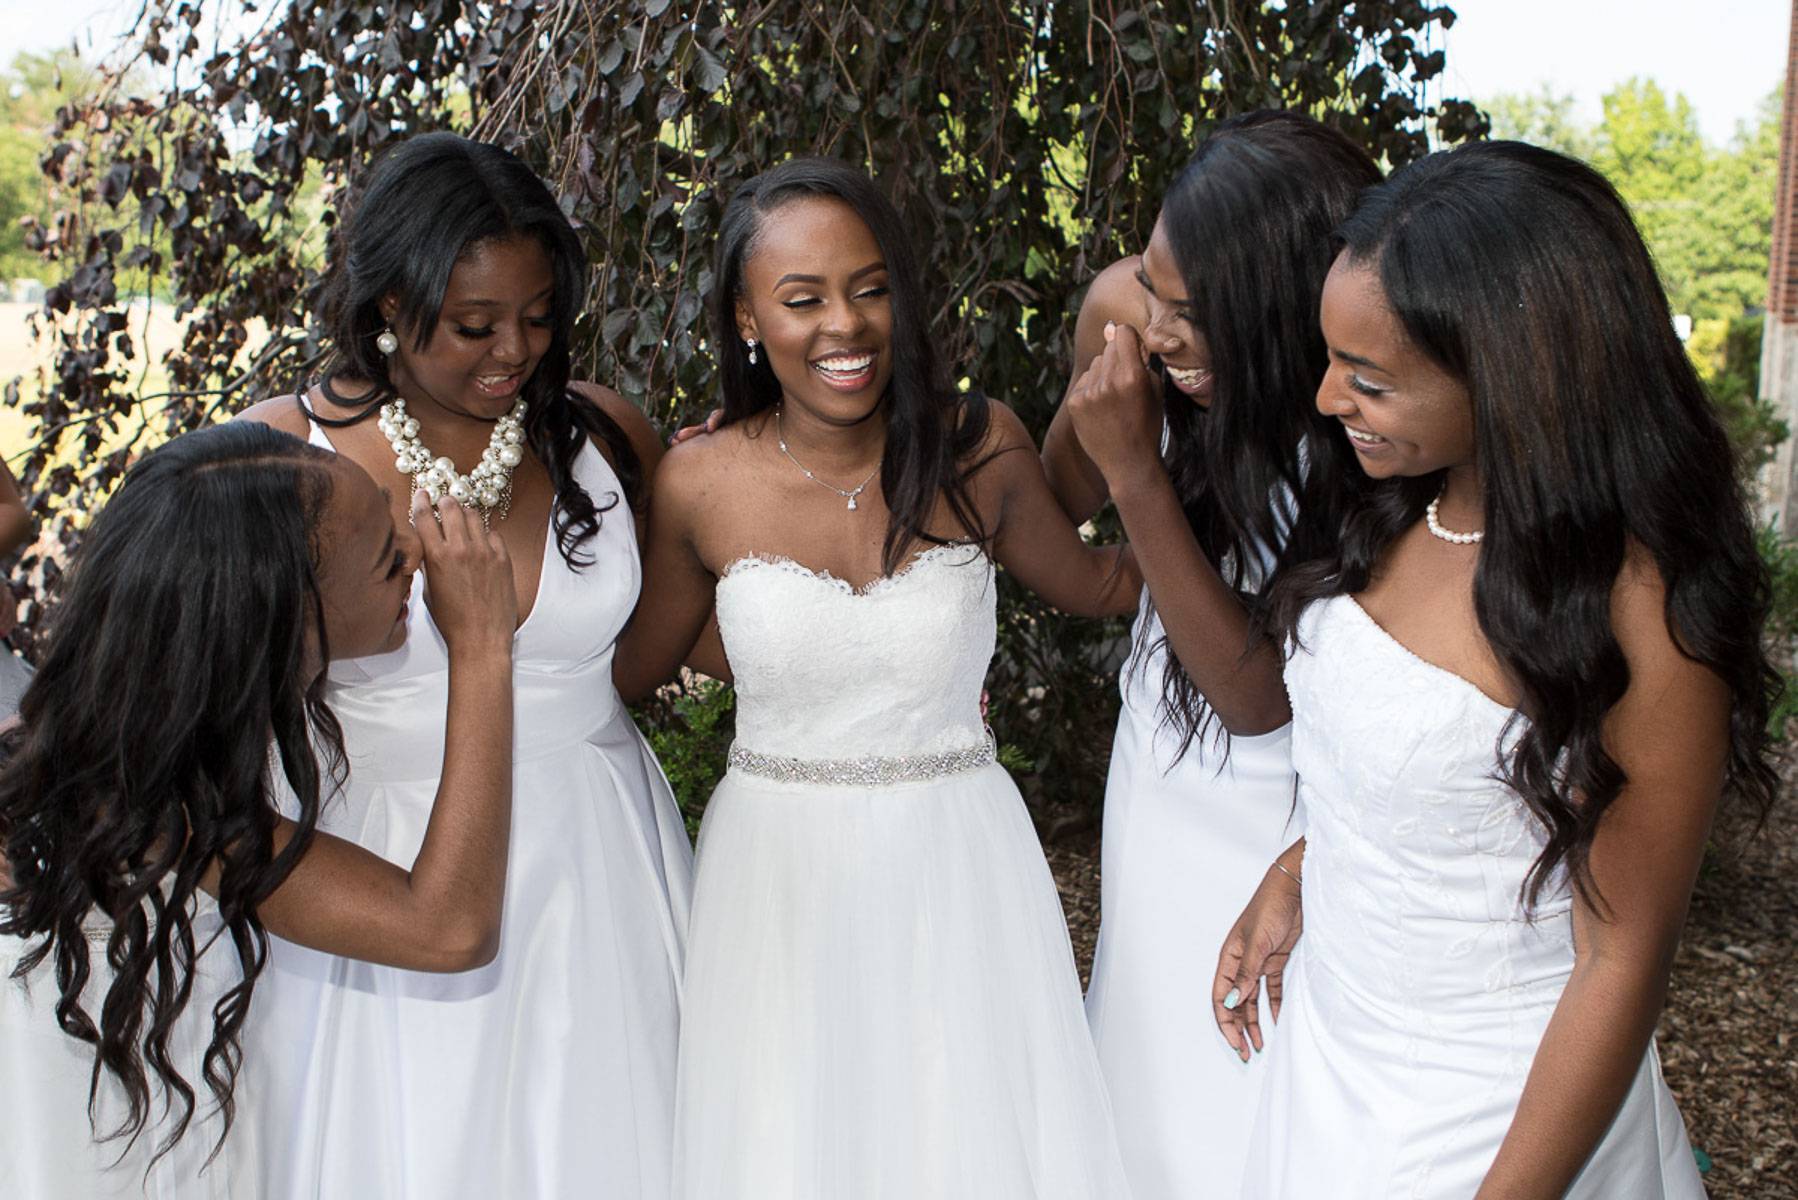 A group of women wearing white dresses